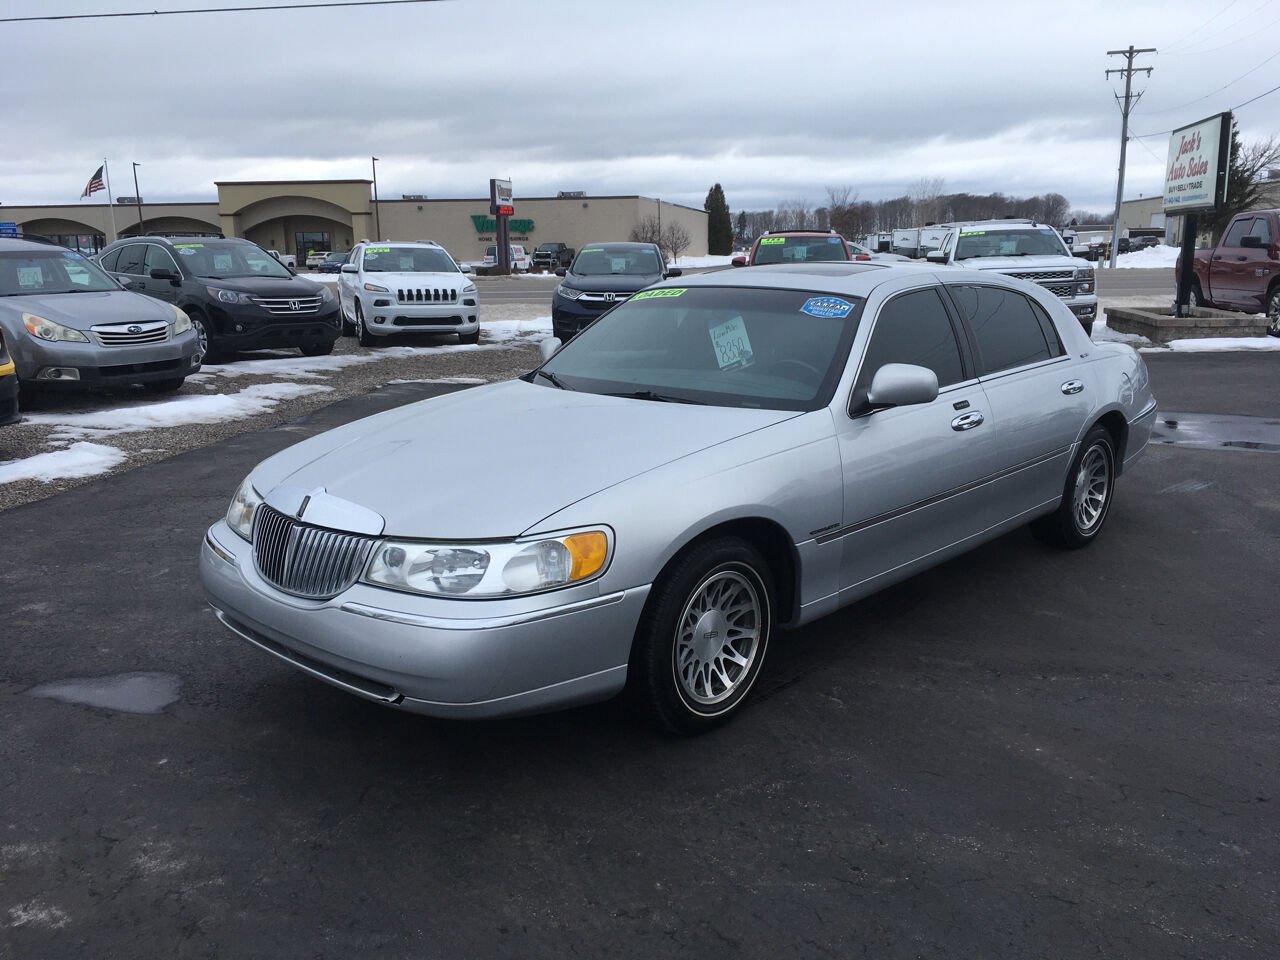 2001 Lincoln Town Car For Sale - Carsforsale.com®